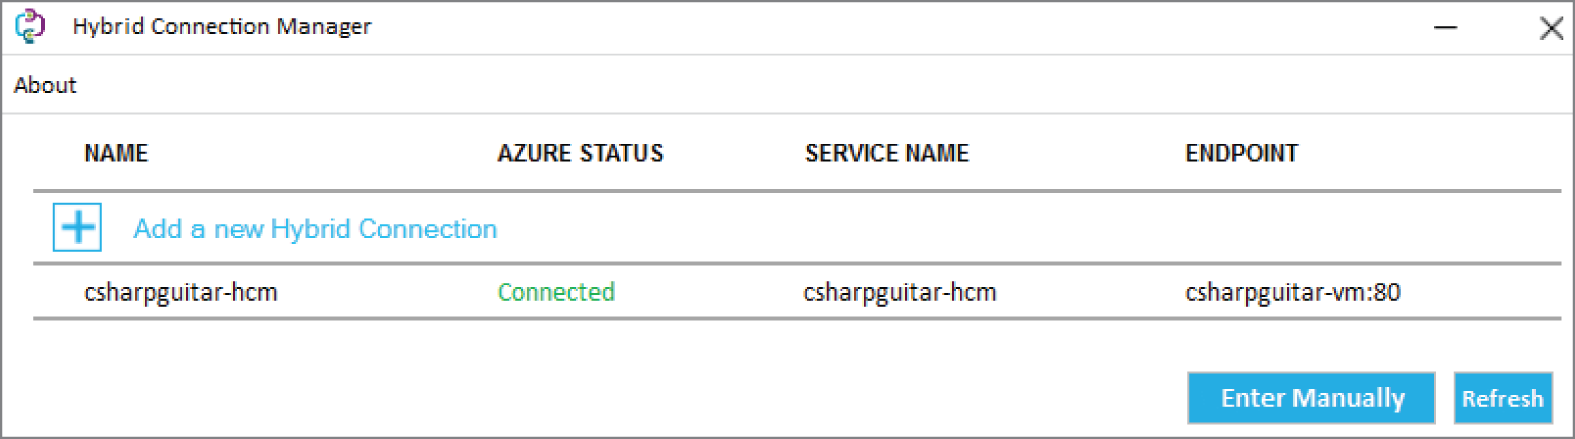 Snapshot of the server-side HCM configurations for a hybrid connection.